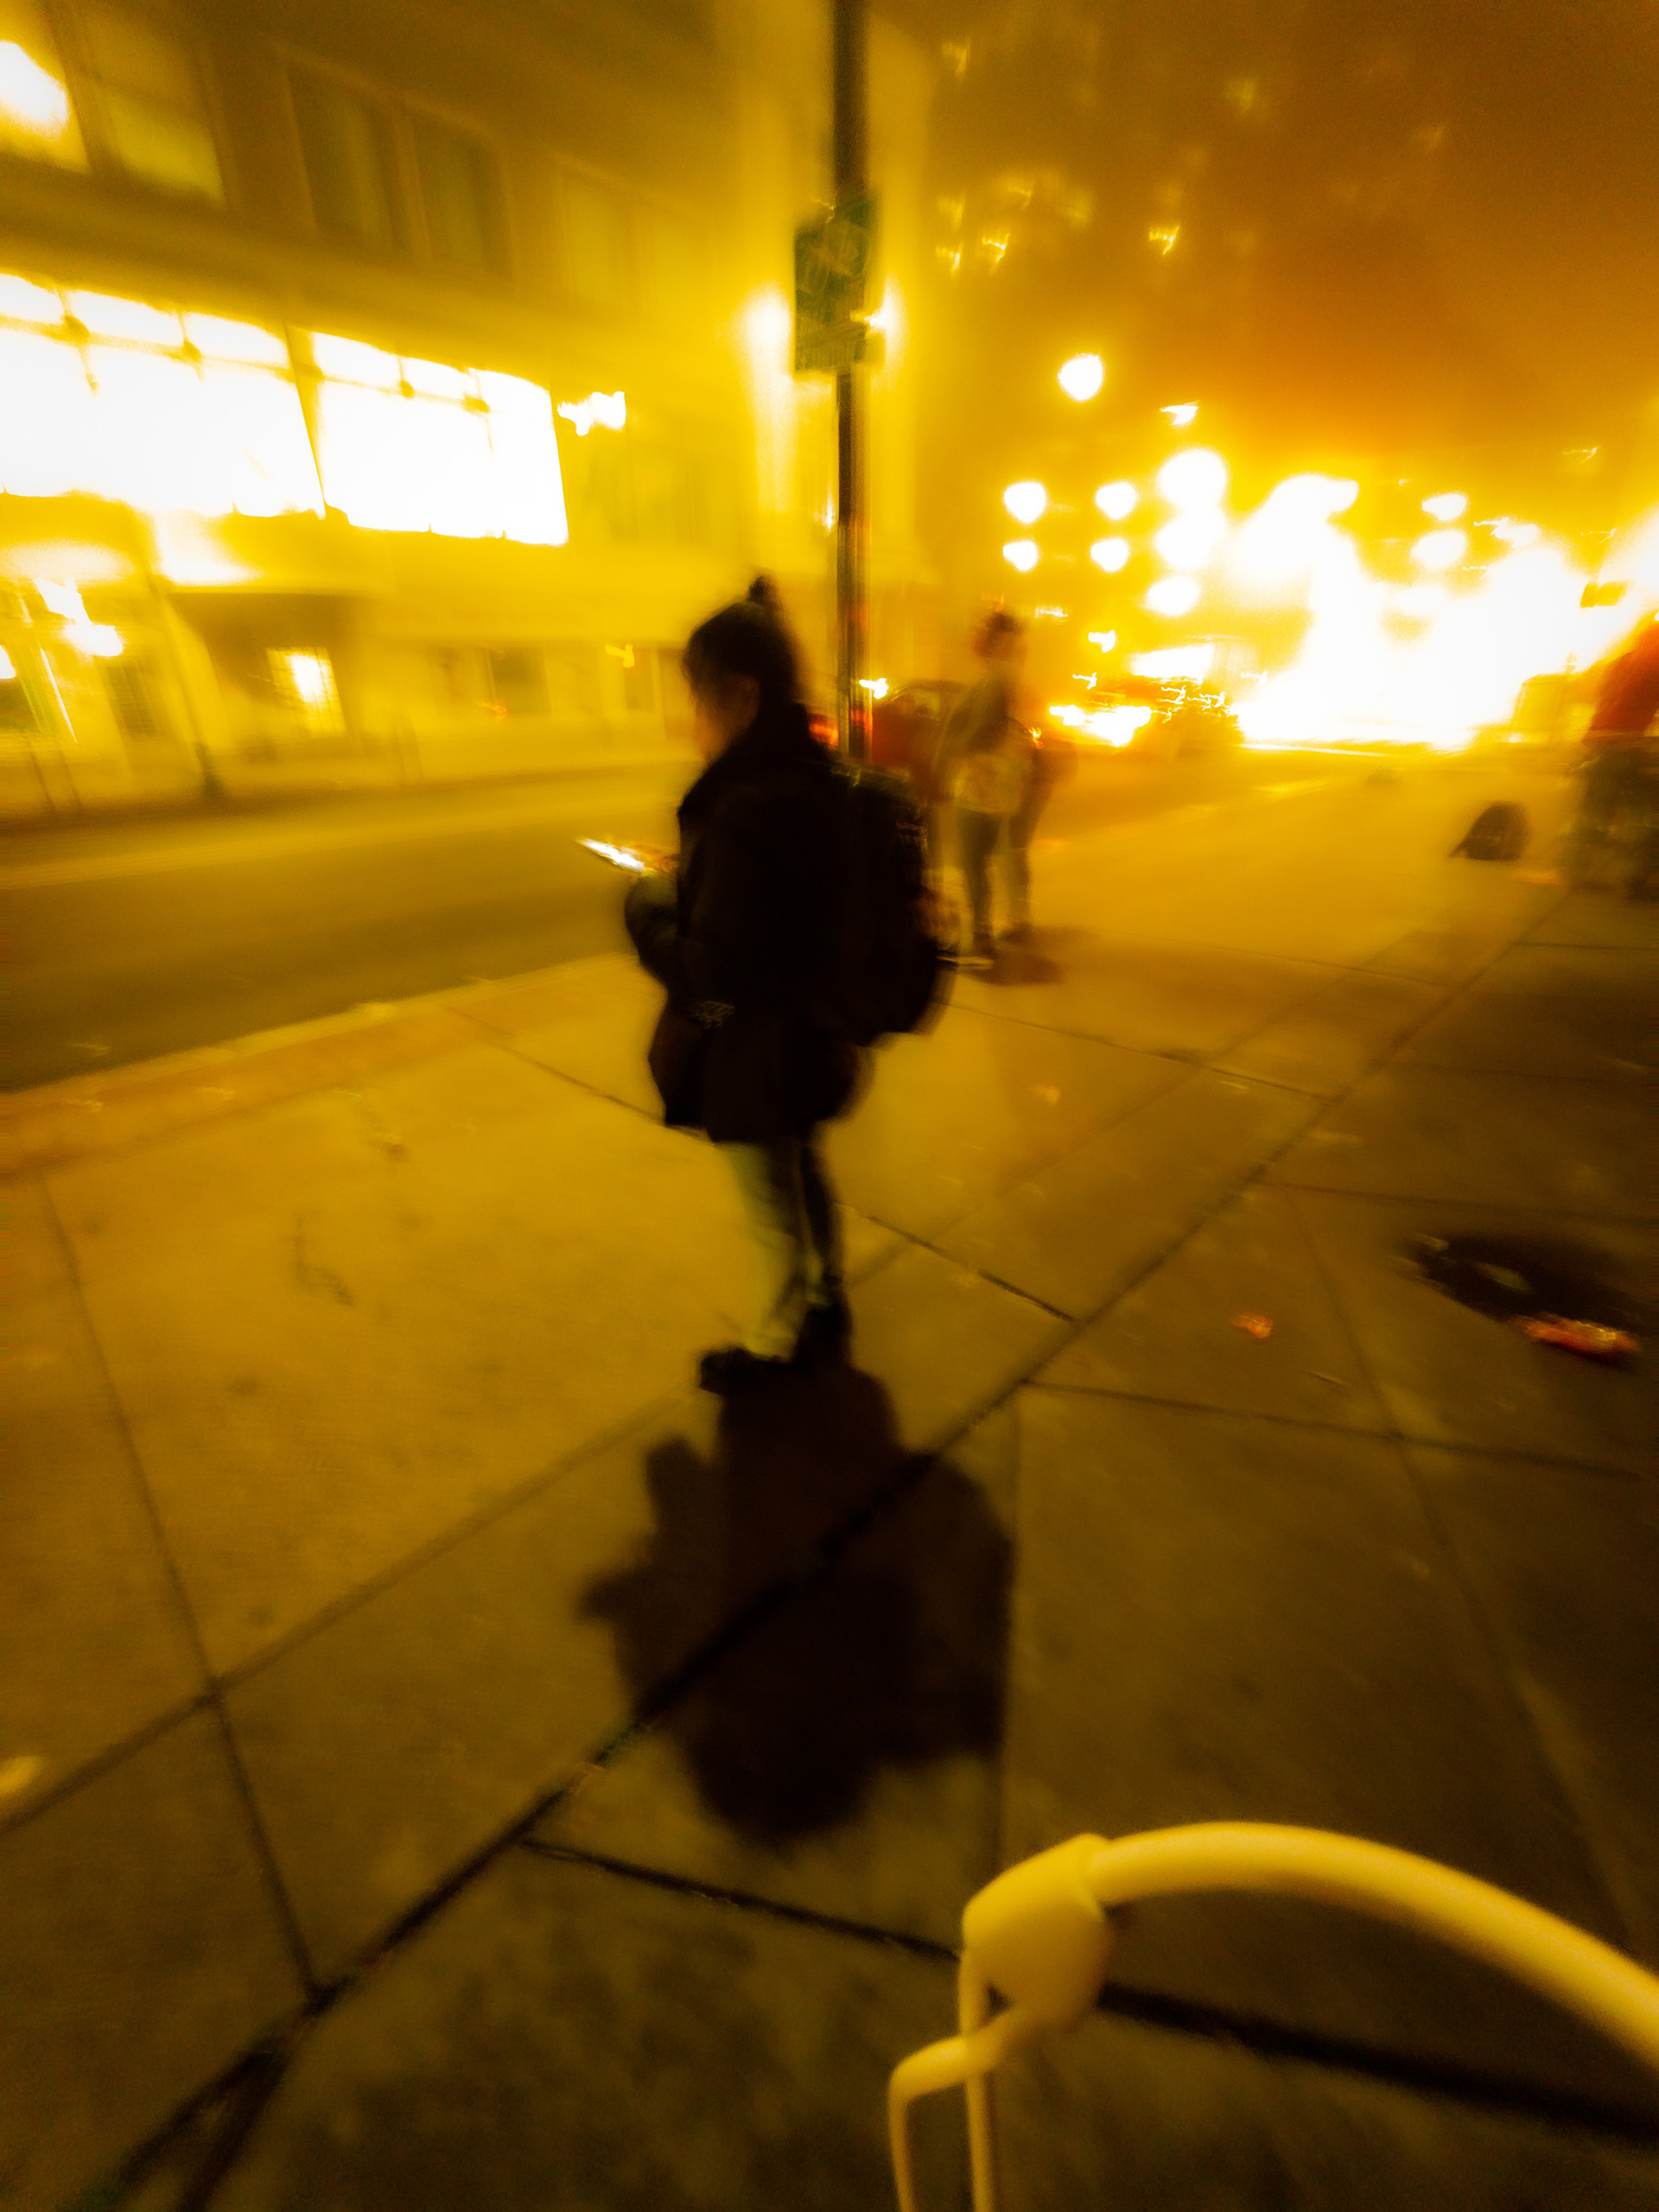 Blurry photo of a person's silhouette  